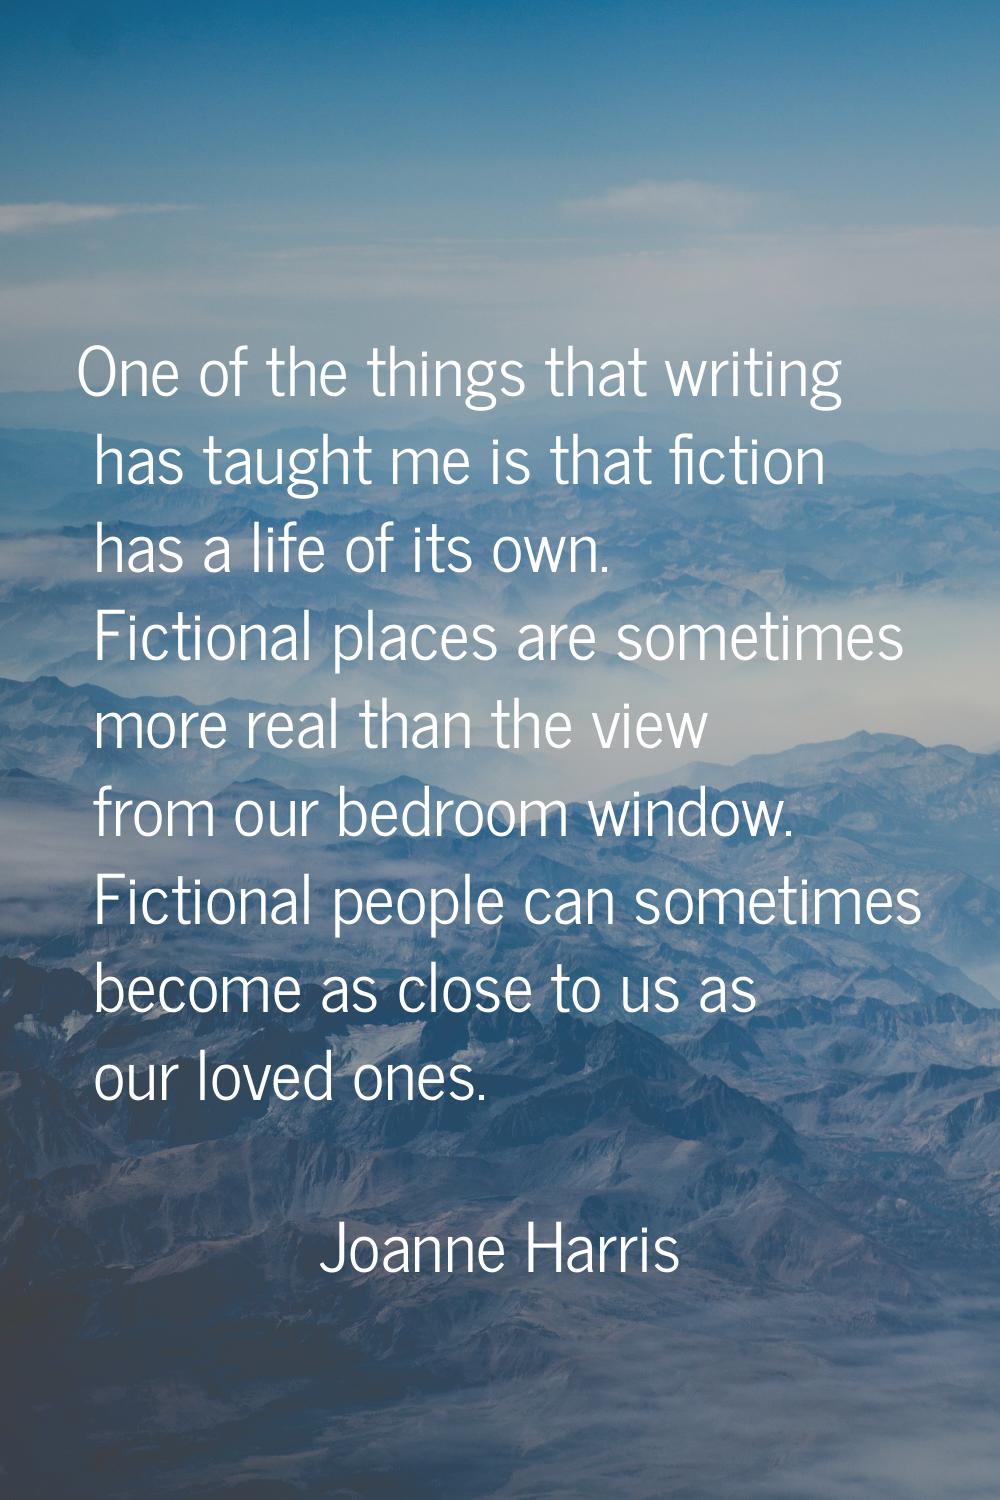 One of the things that writing has taught me is that fiction has a life of its own. Fictional place